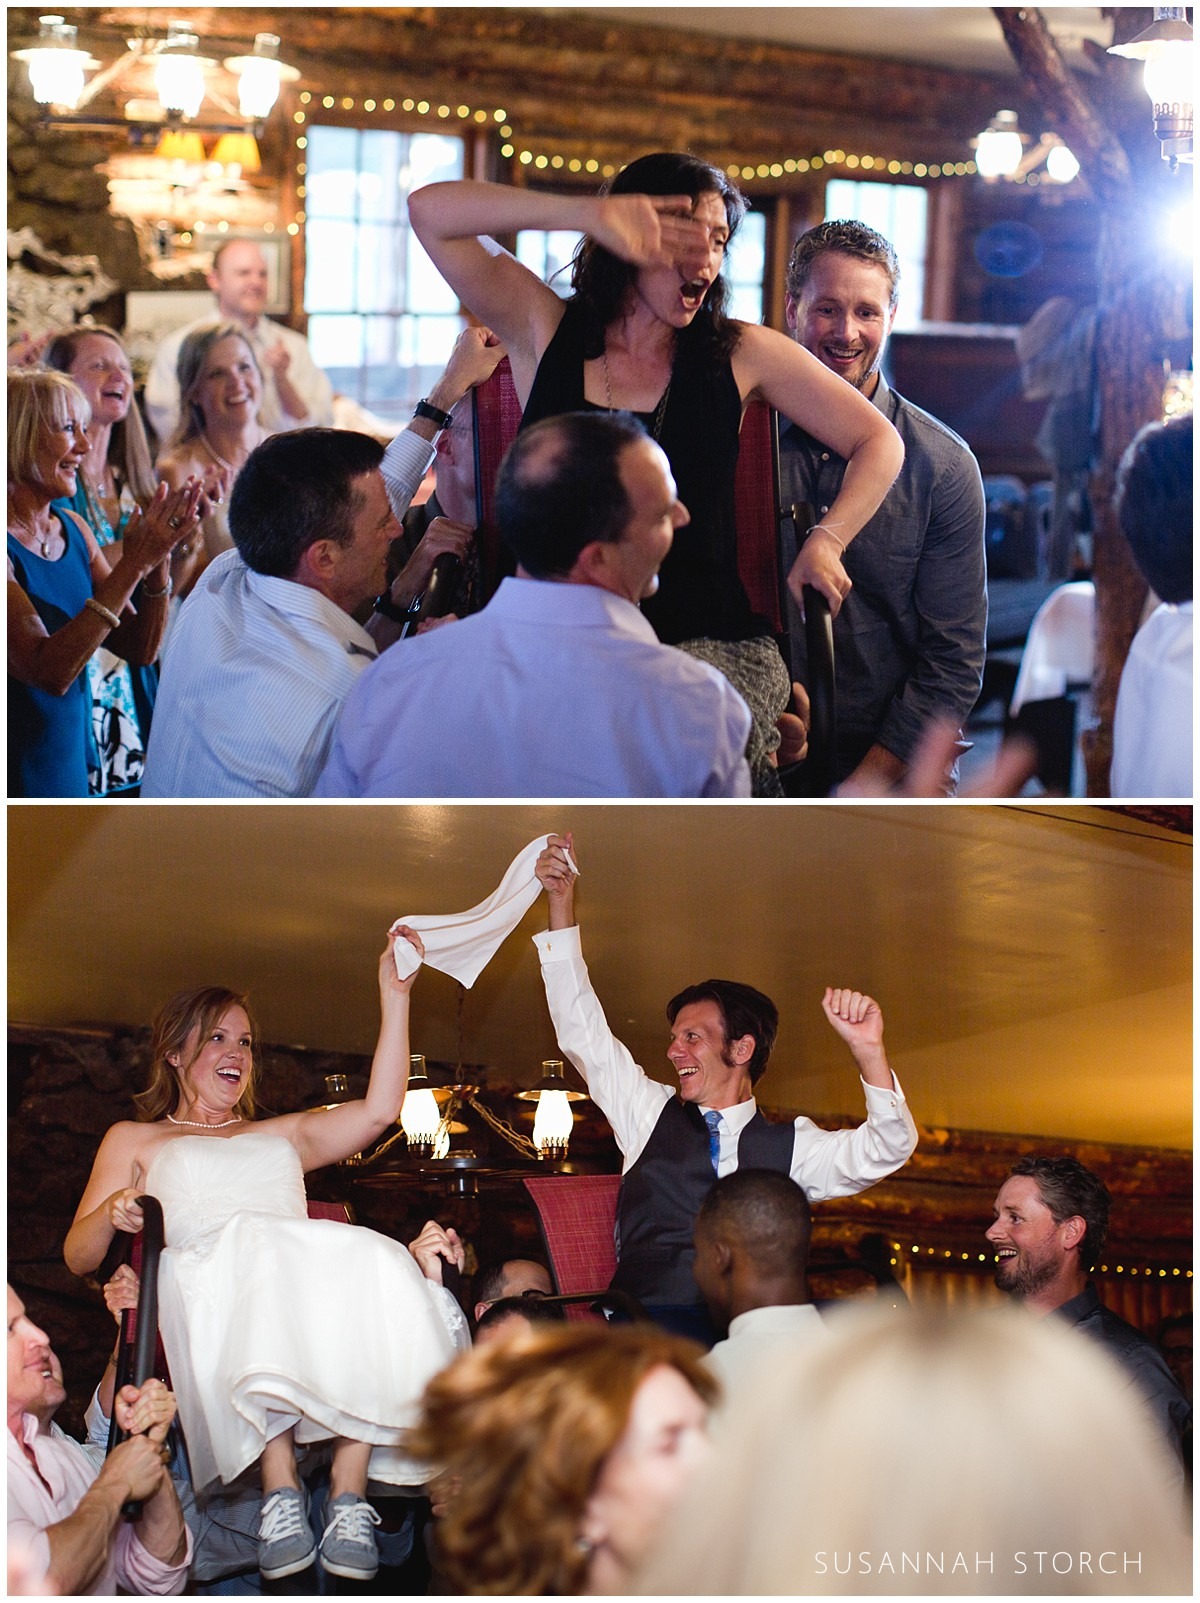 two images of a wedding reception featuring the horah dance